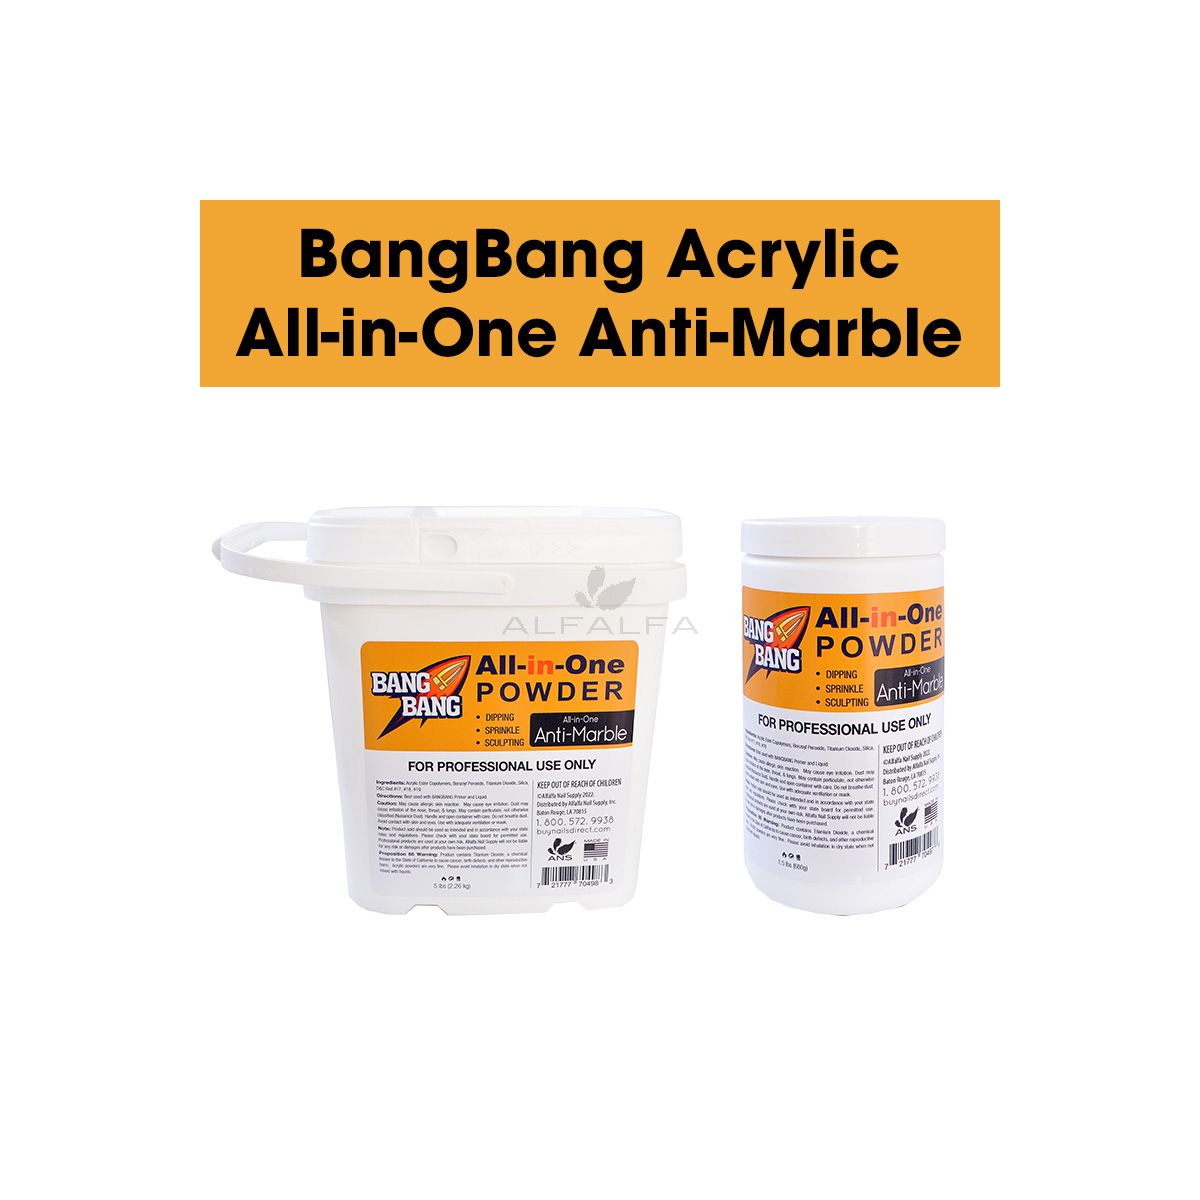 BangBang Acrylic All-in-One Anti-Marble